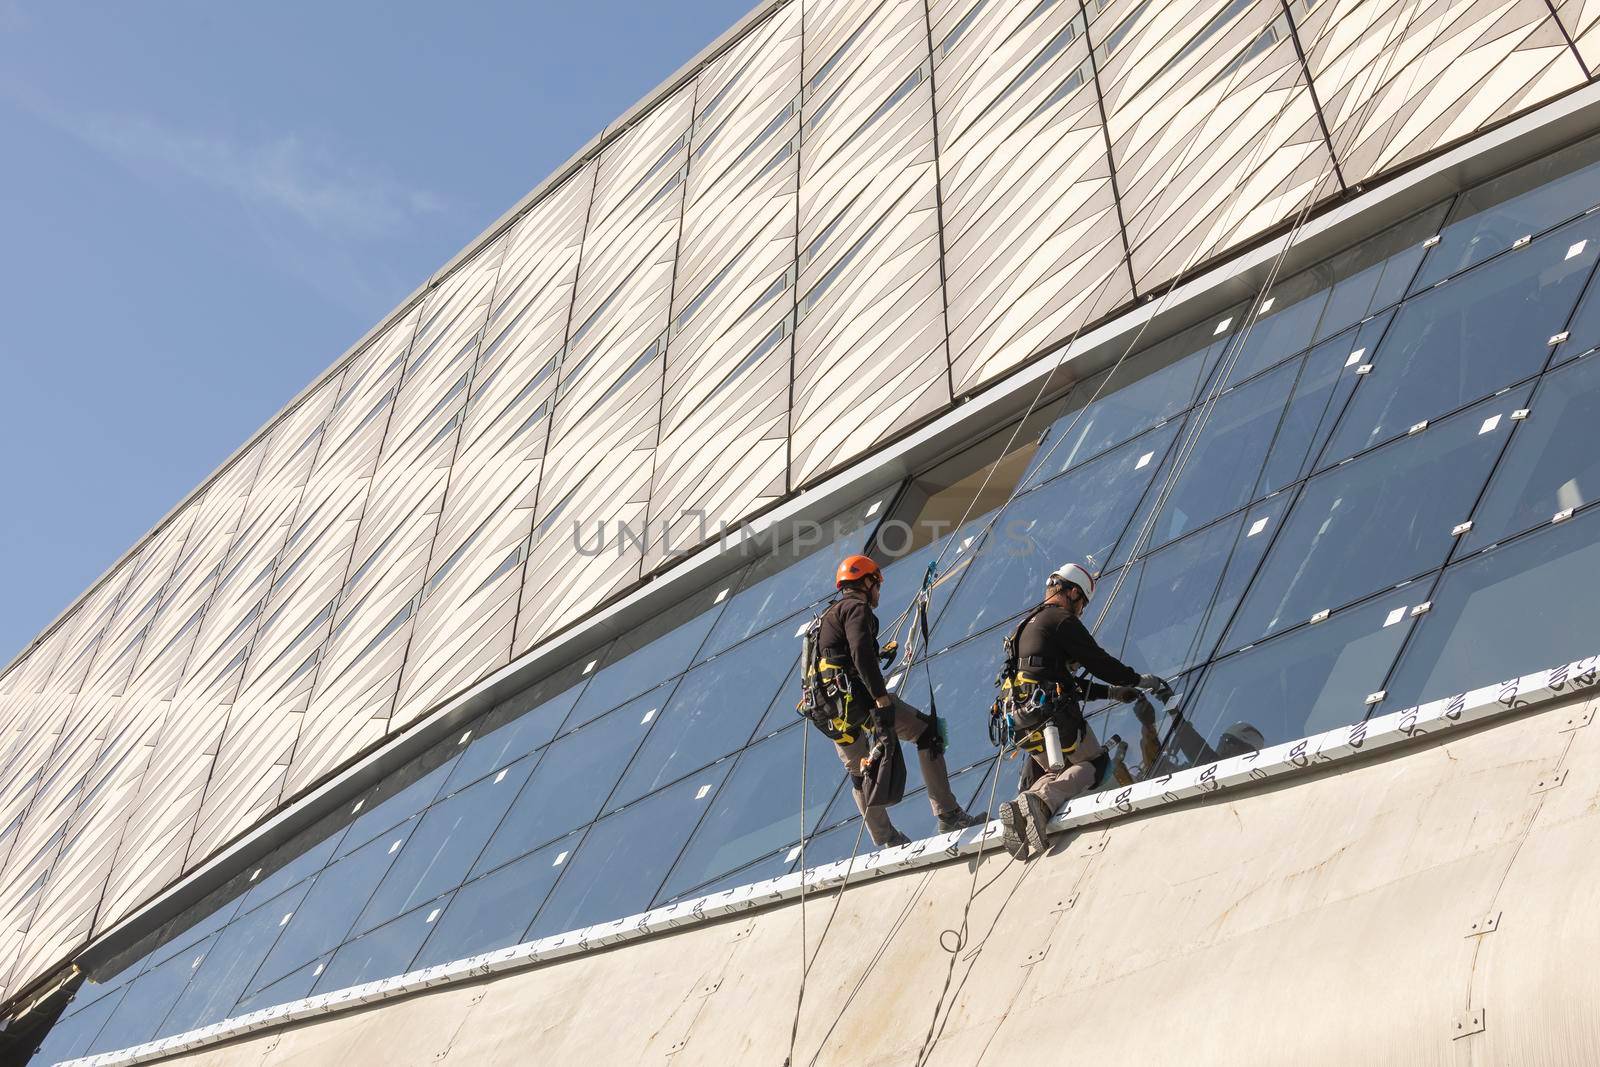 Zaragoza, Spain - Sep. 30, 2020: Specialist technical workers carry out maintenance and rehabilitation work, wearing safety harnesses, on the facade of the Zaragoza bridge pavilion.